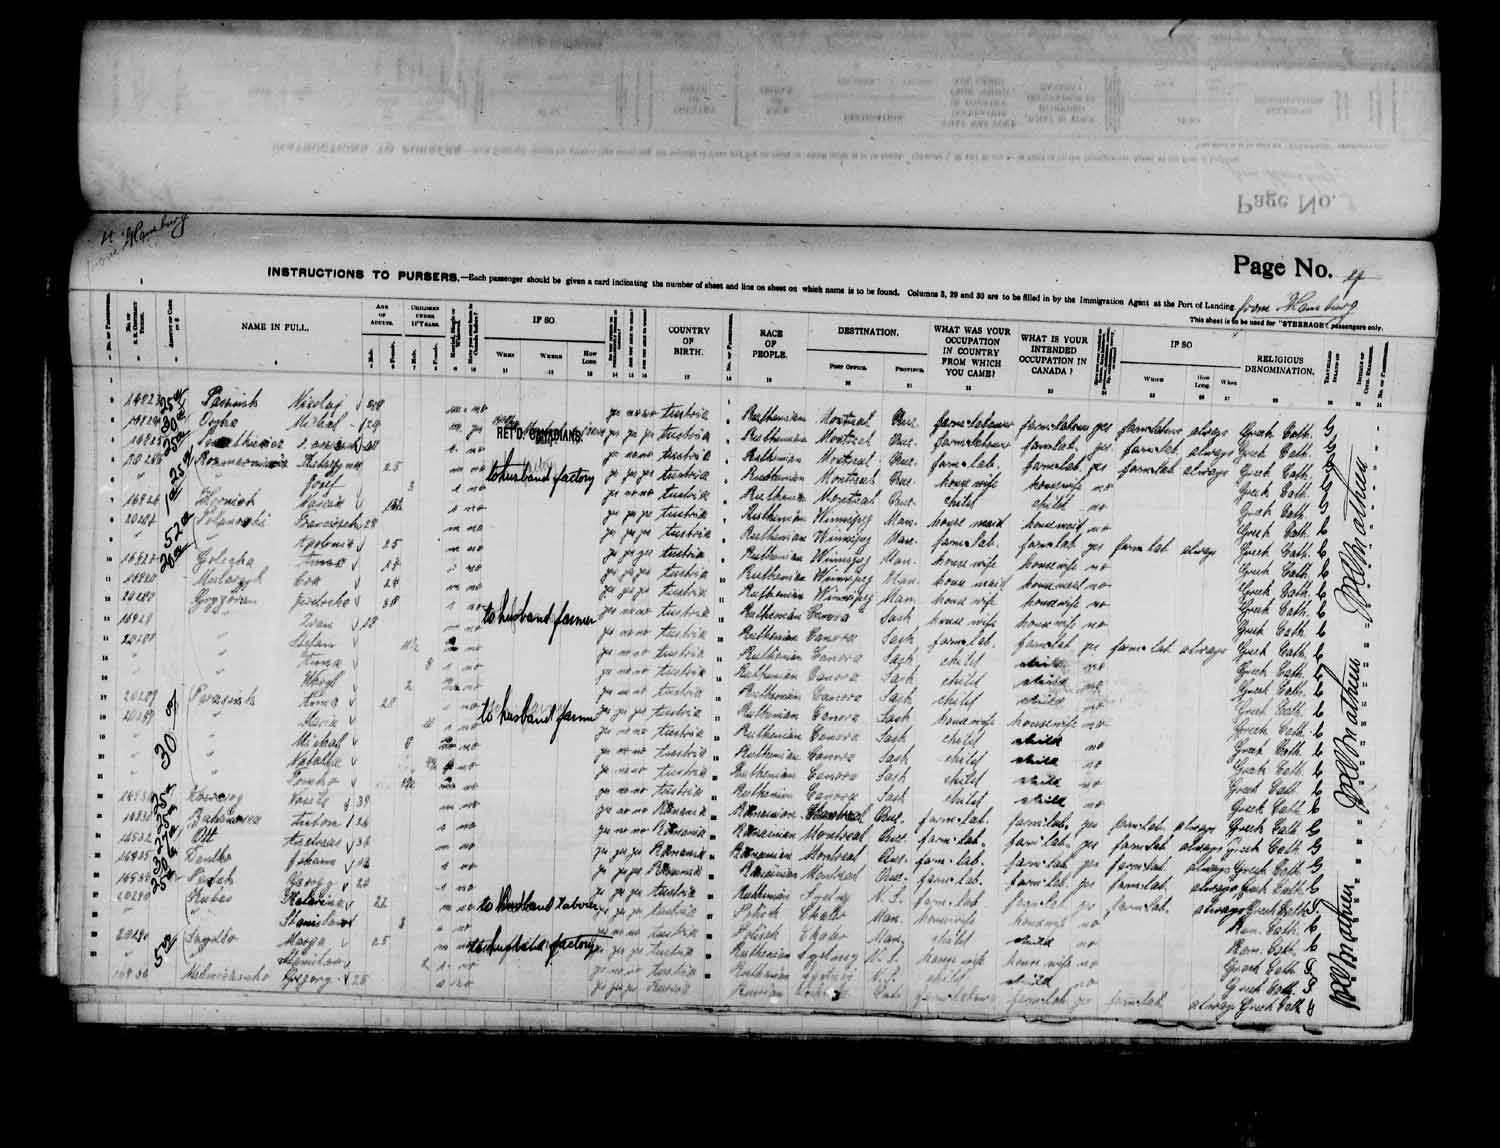 Digitized page of Passenger Lists for Image No.: e003575016